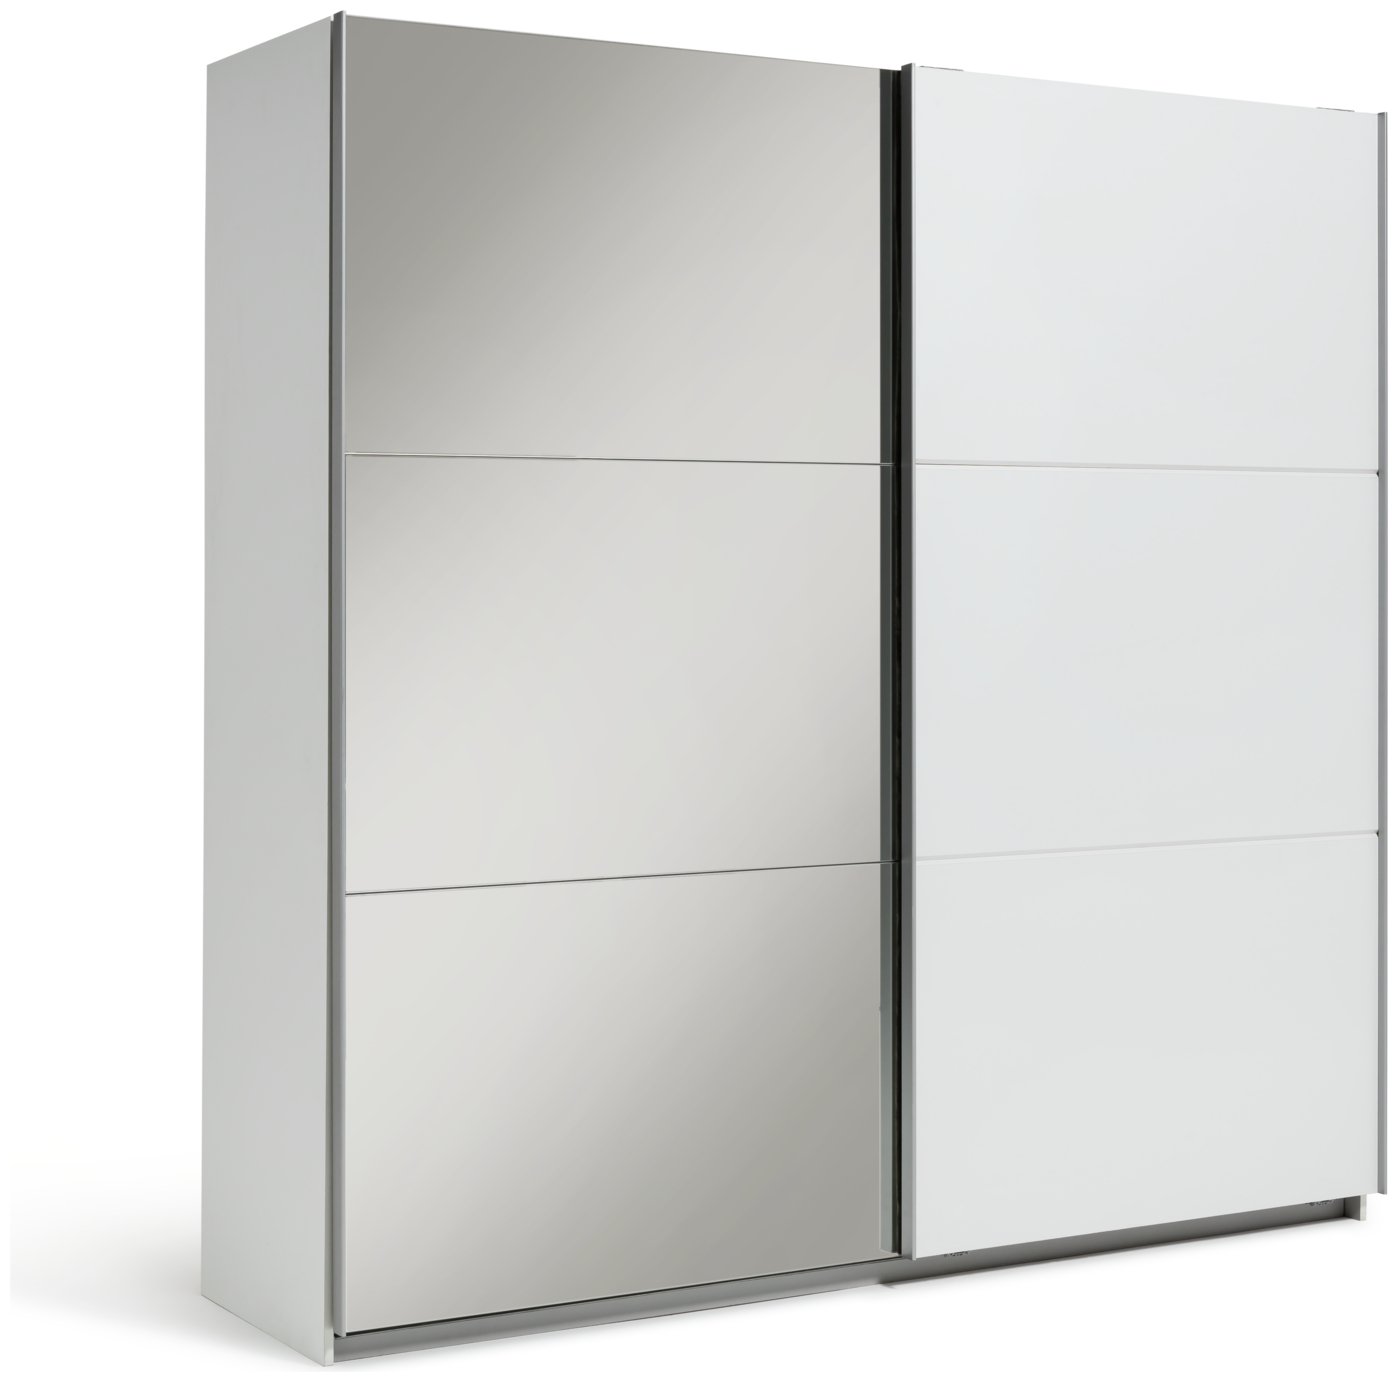 Argos Home Holsted XL Mirrored Sliding Wardrobe Review